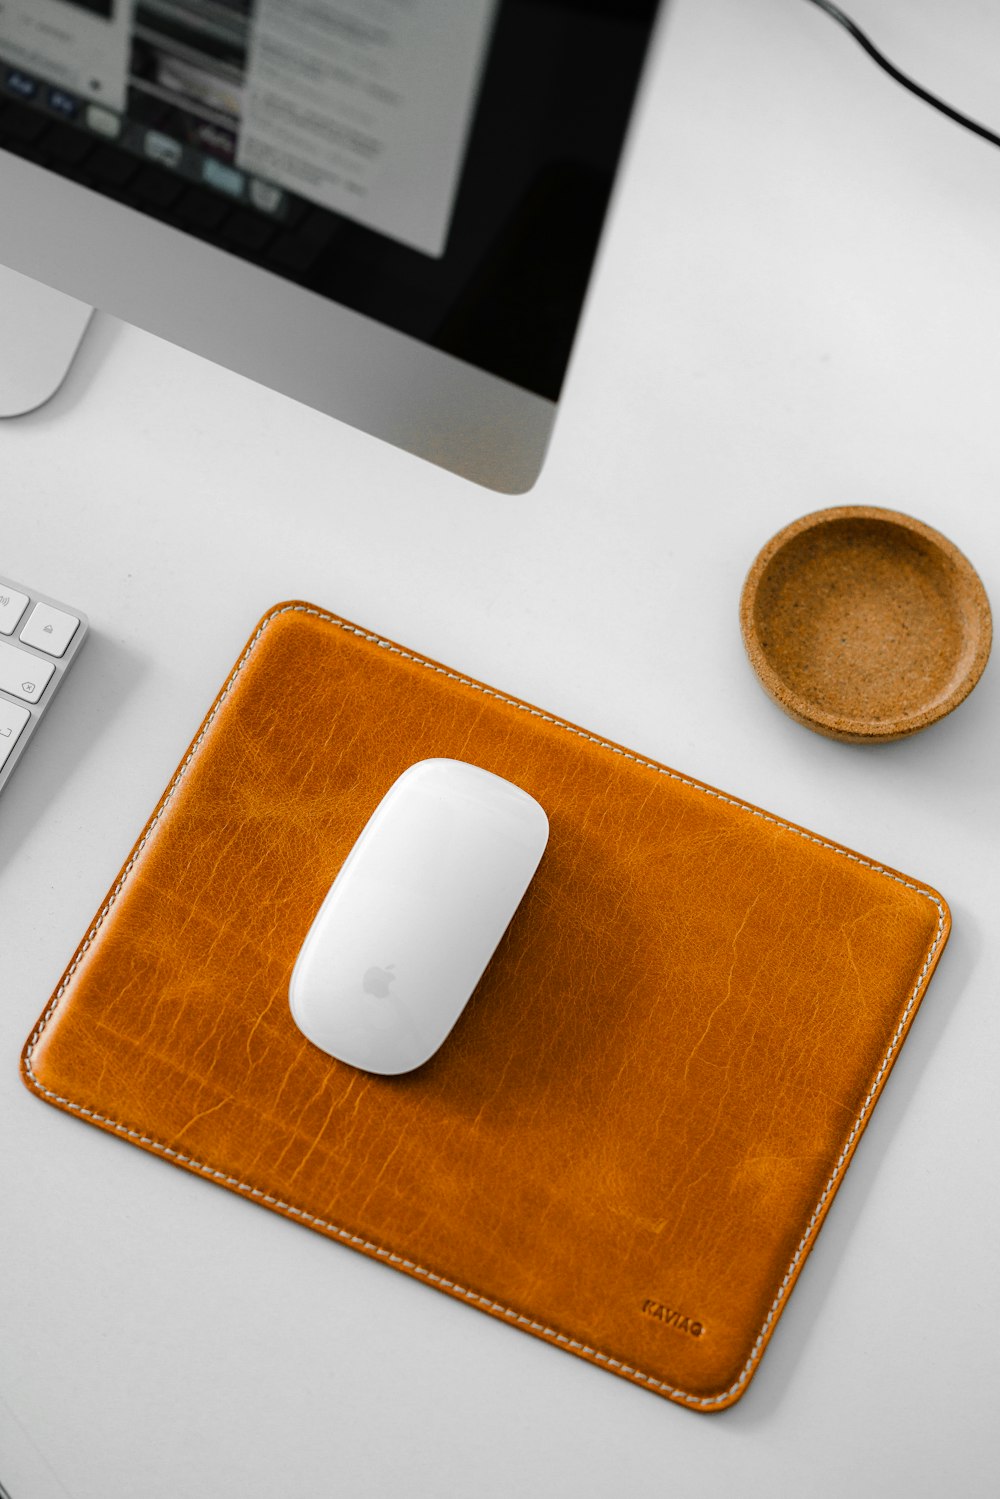 a computer mouse and a leather pad on a desk